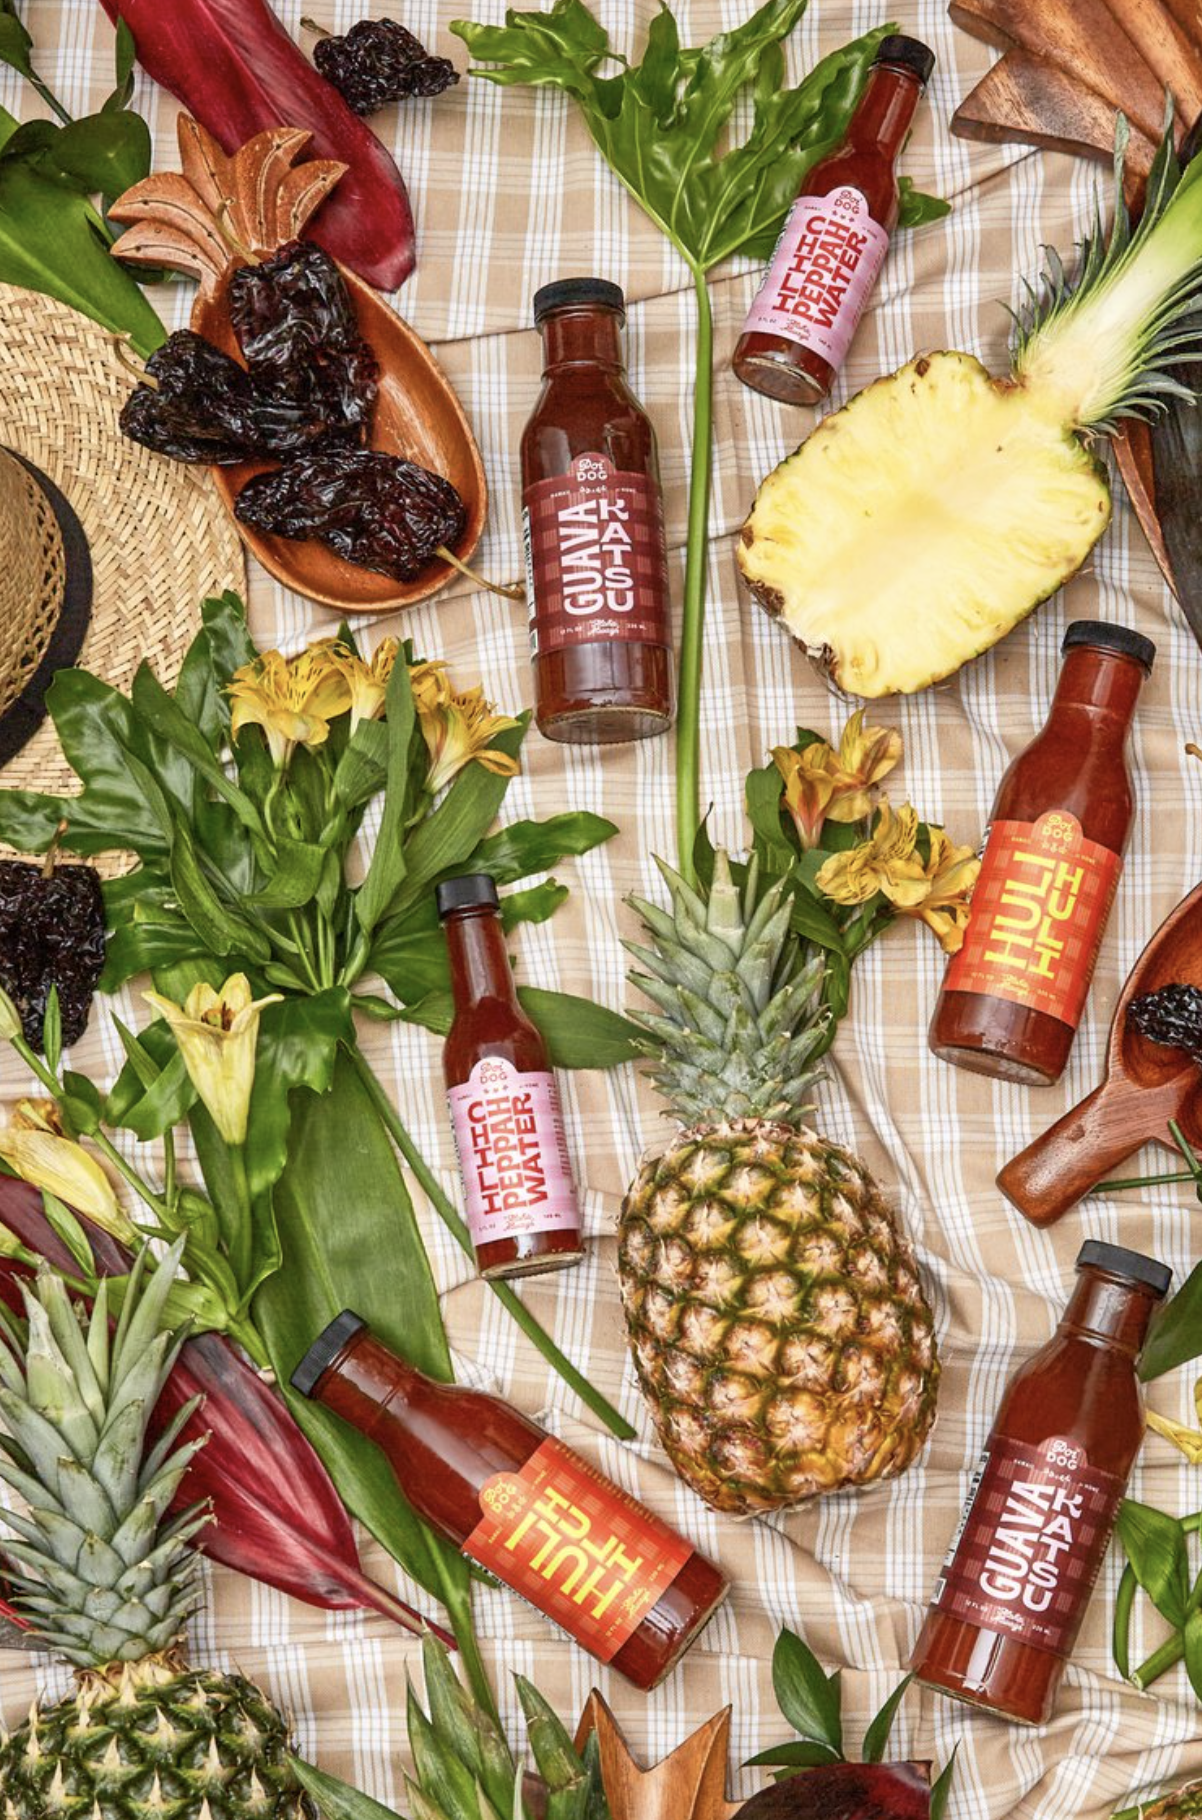 Poi Dog sauces surrounded by pineapples and Hawaiian plants.